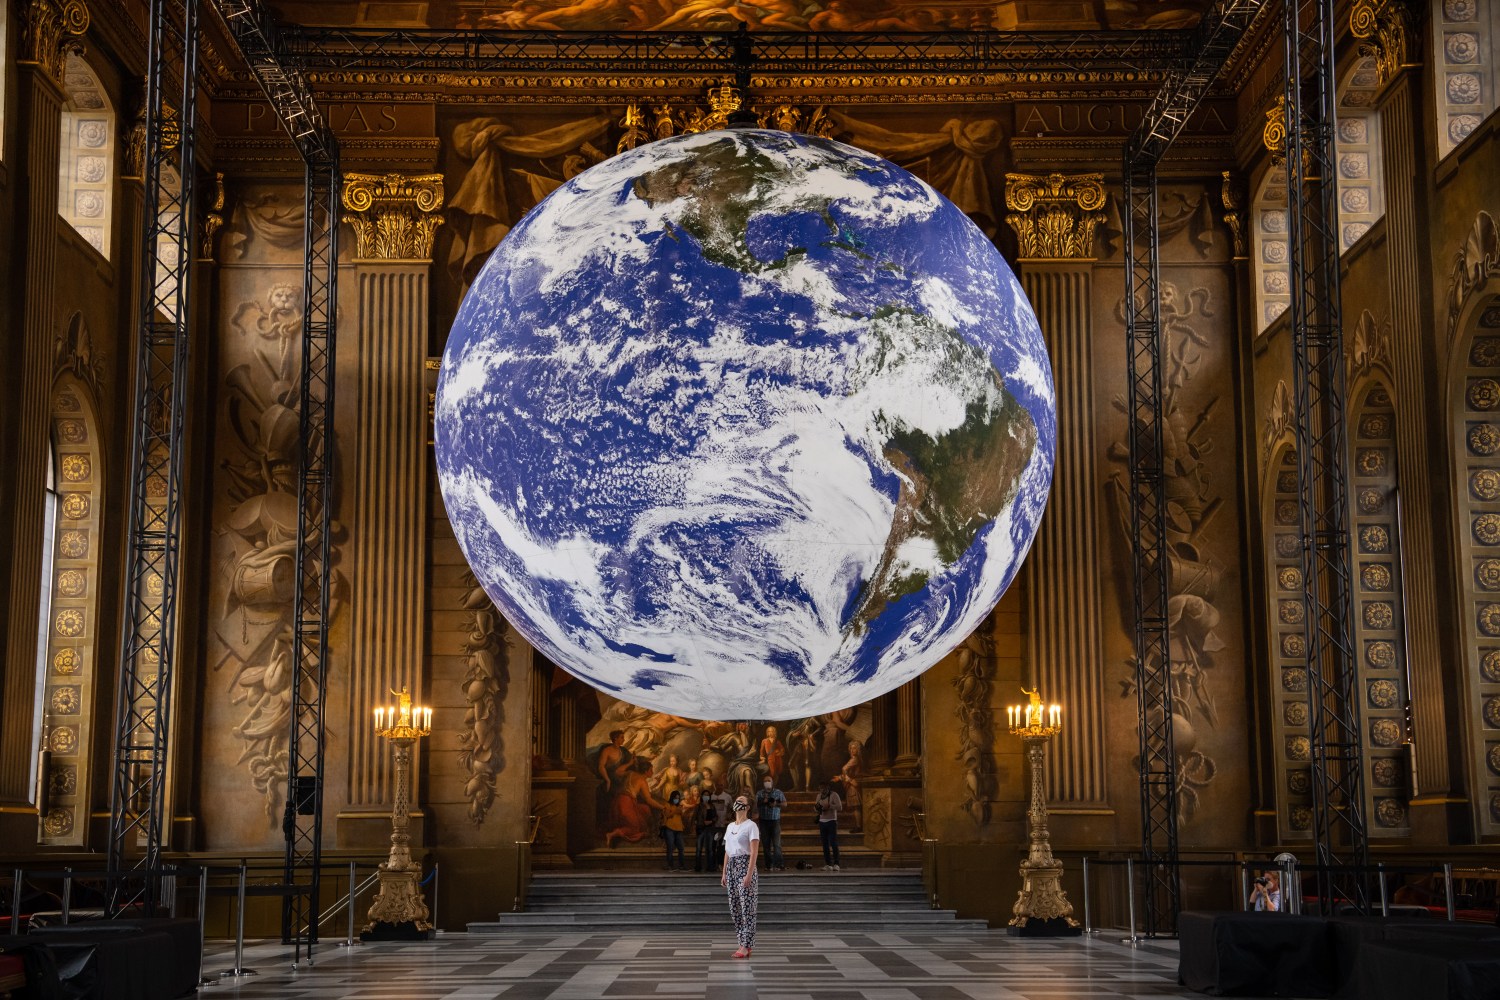 PA via ReutersLuke Jerram's artwork Gaia, a replica of planet earth created using detailed NASA imagery of the Earth's surface, goes on display in the Painted Hall of the Old Royal Naval College, Greenwich, London, as part of the 2020 Greenwich+Docklands International Festival. Picture date: Friday August 28, 2020. Photo credit should read: Matt Crossick/EmpicsNo Use UK. No Use Ireland. No Use Belgium. No Use France. No Use Germany. No Use Japan. No Use China. No Use Norway. No Use Sweden. No Use Denmark. No Use Holland